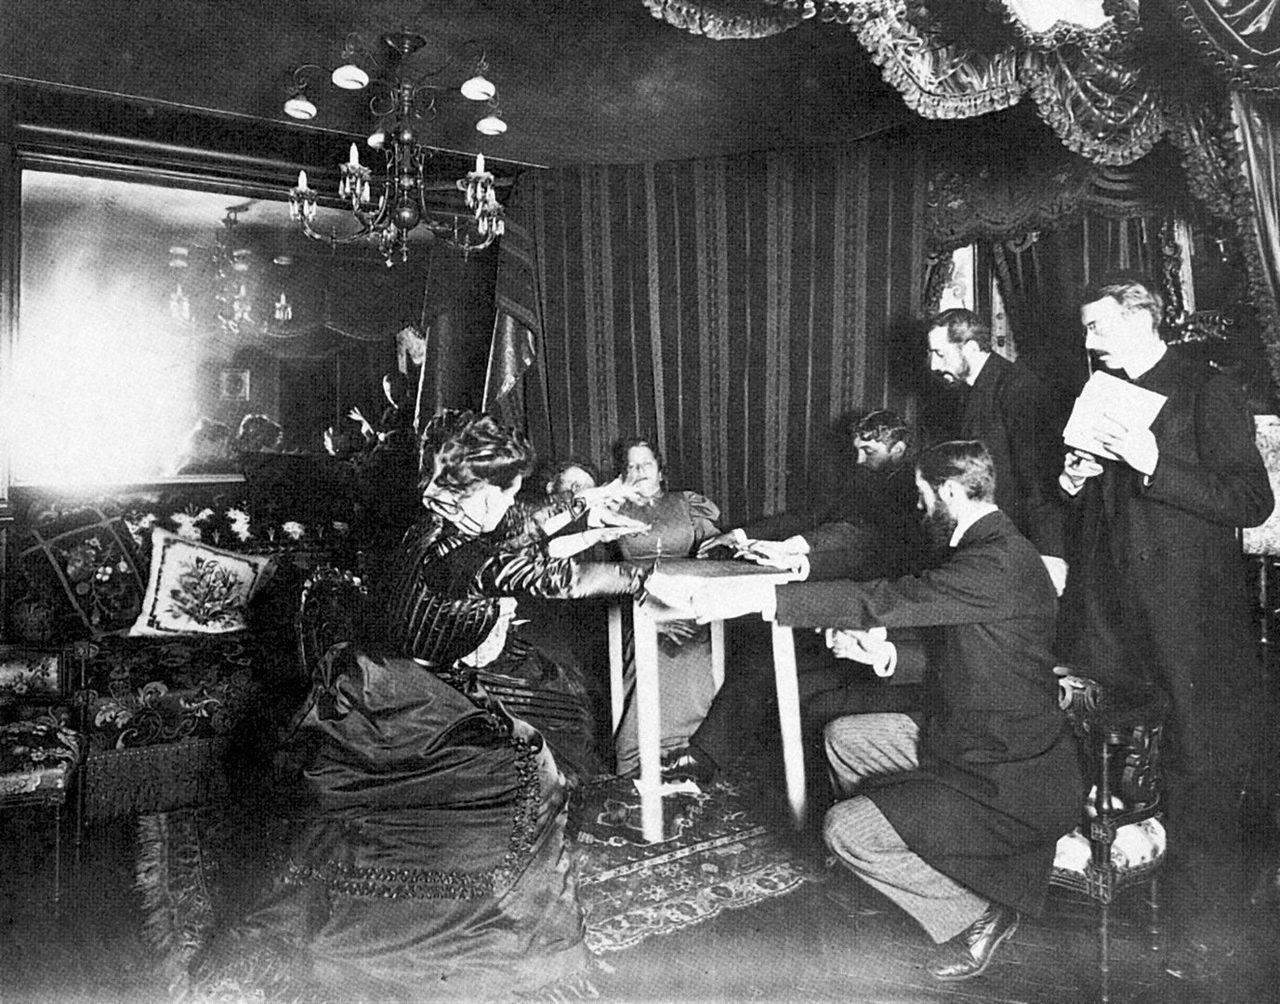 Medium Eusapia Palladino performs a séance at the French home of astronomer Camille Flammarion on November 24, 1898.